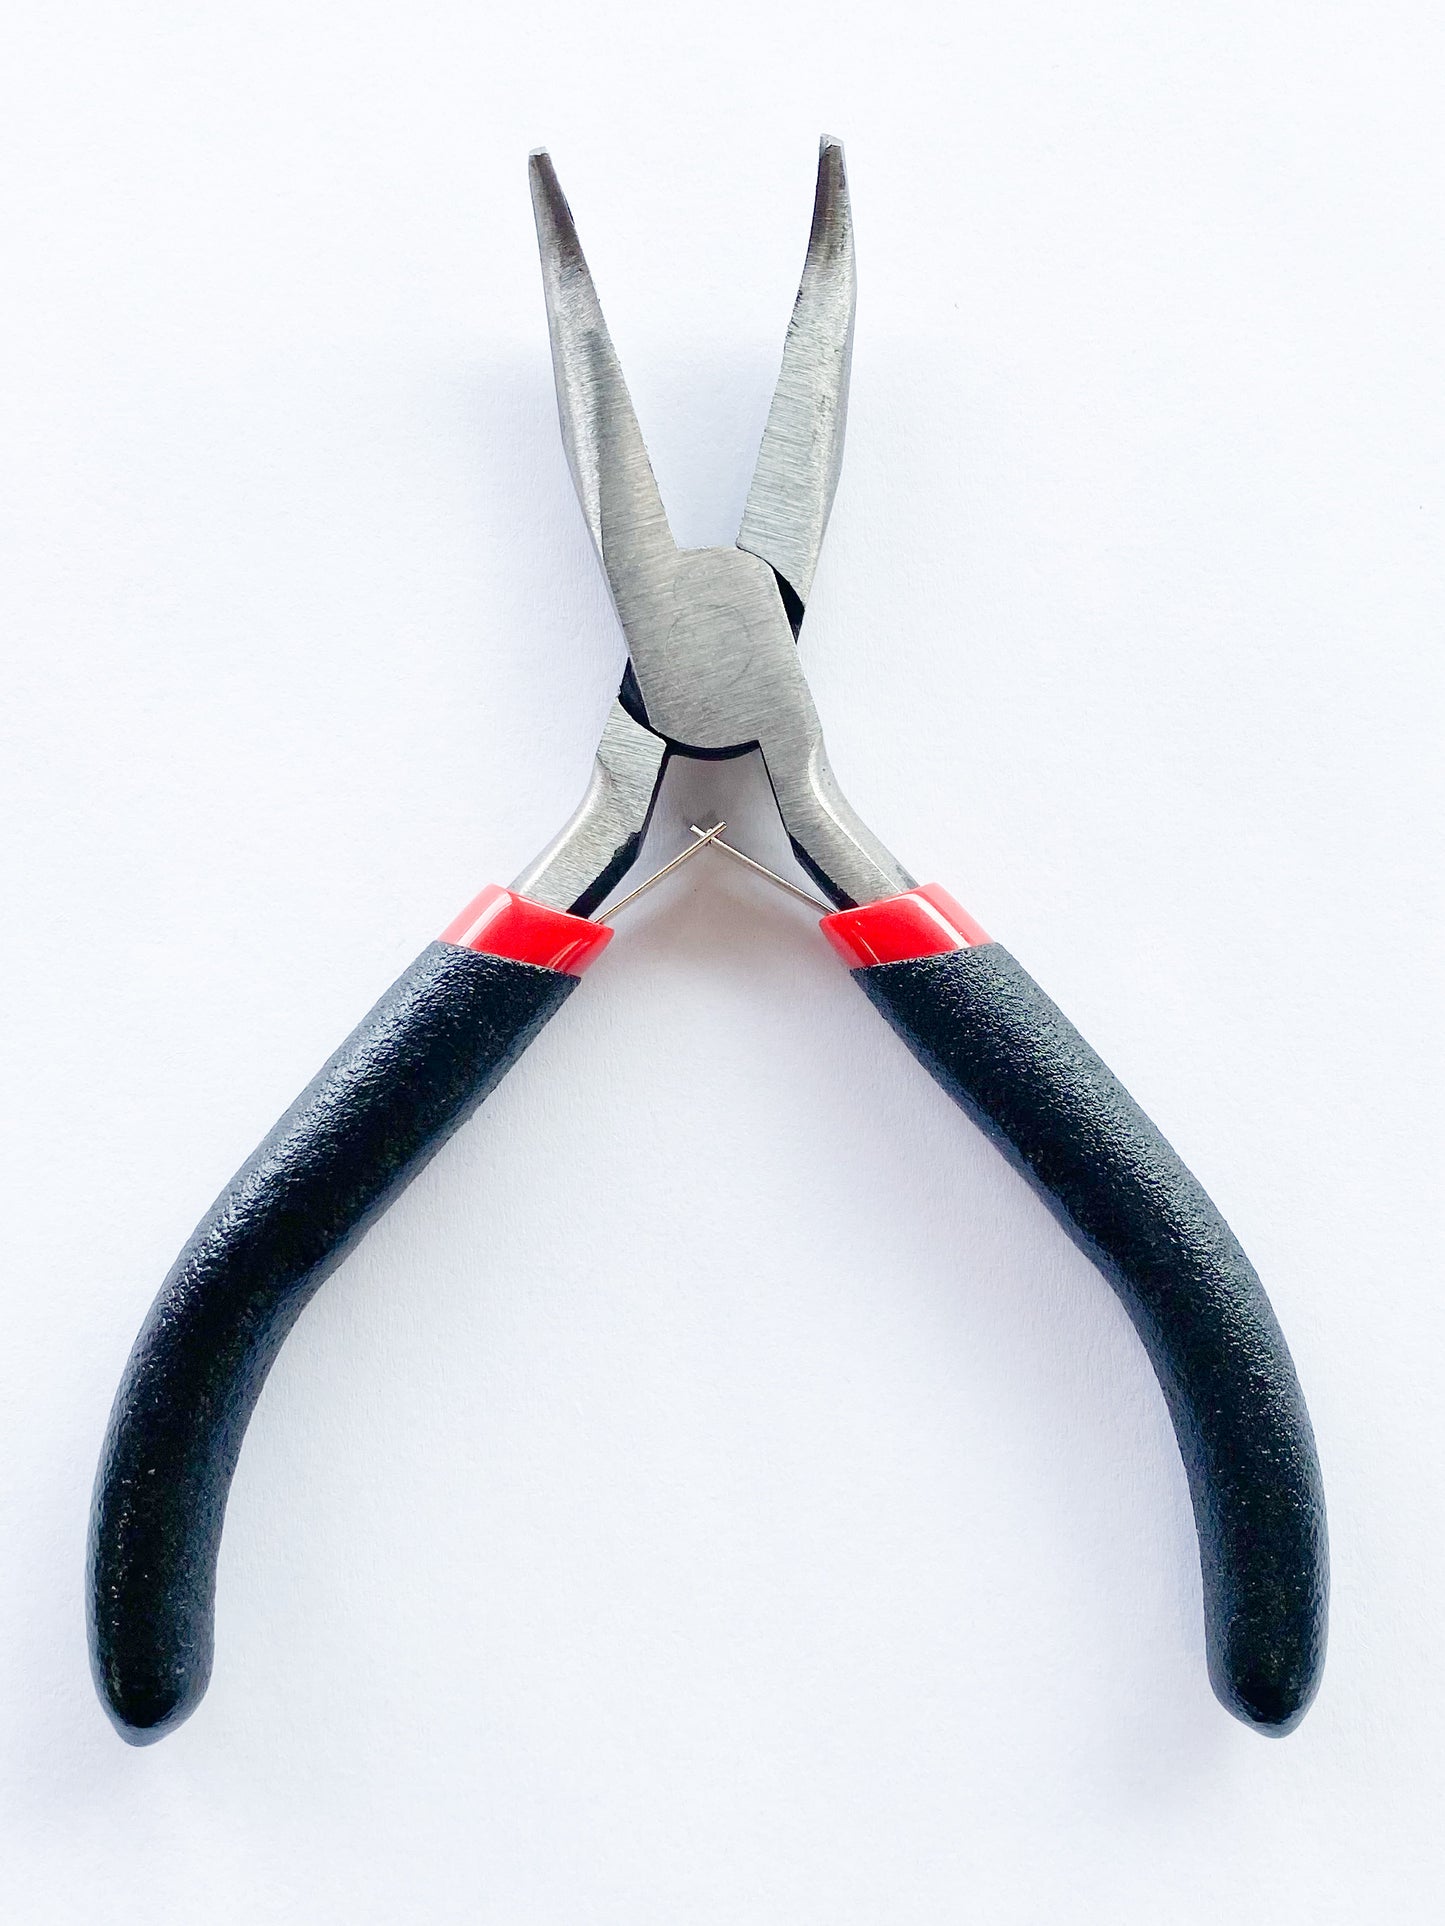 TBS Bent Chain Nose Pliers 5 1-8"